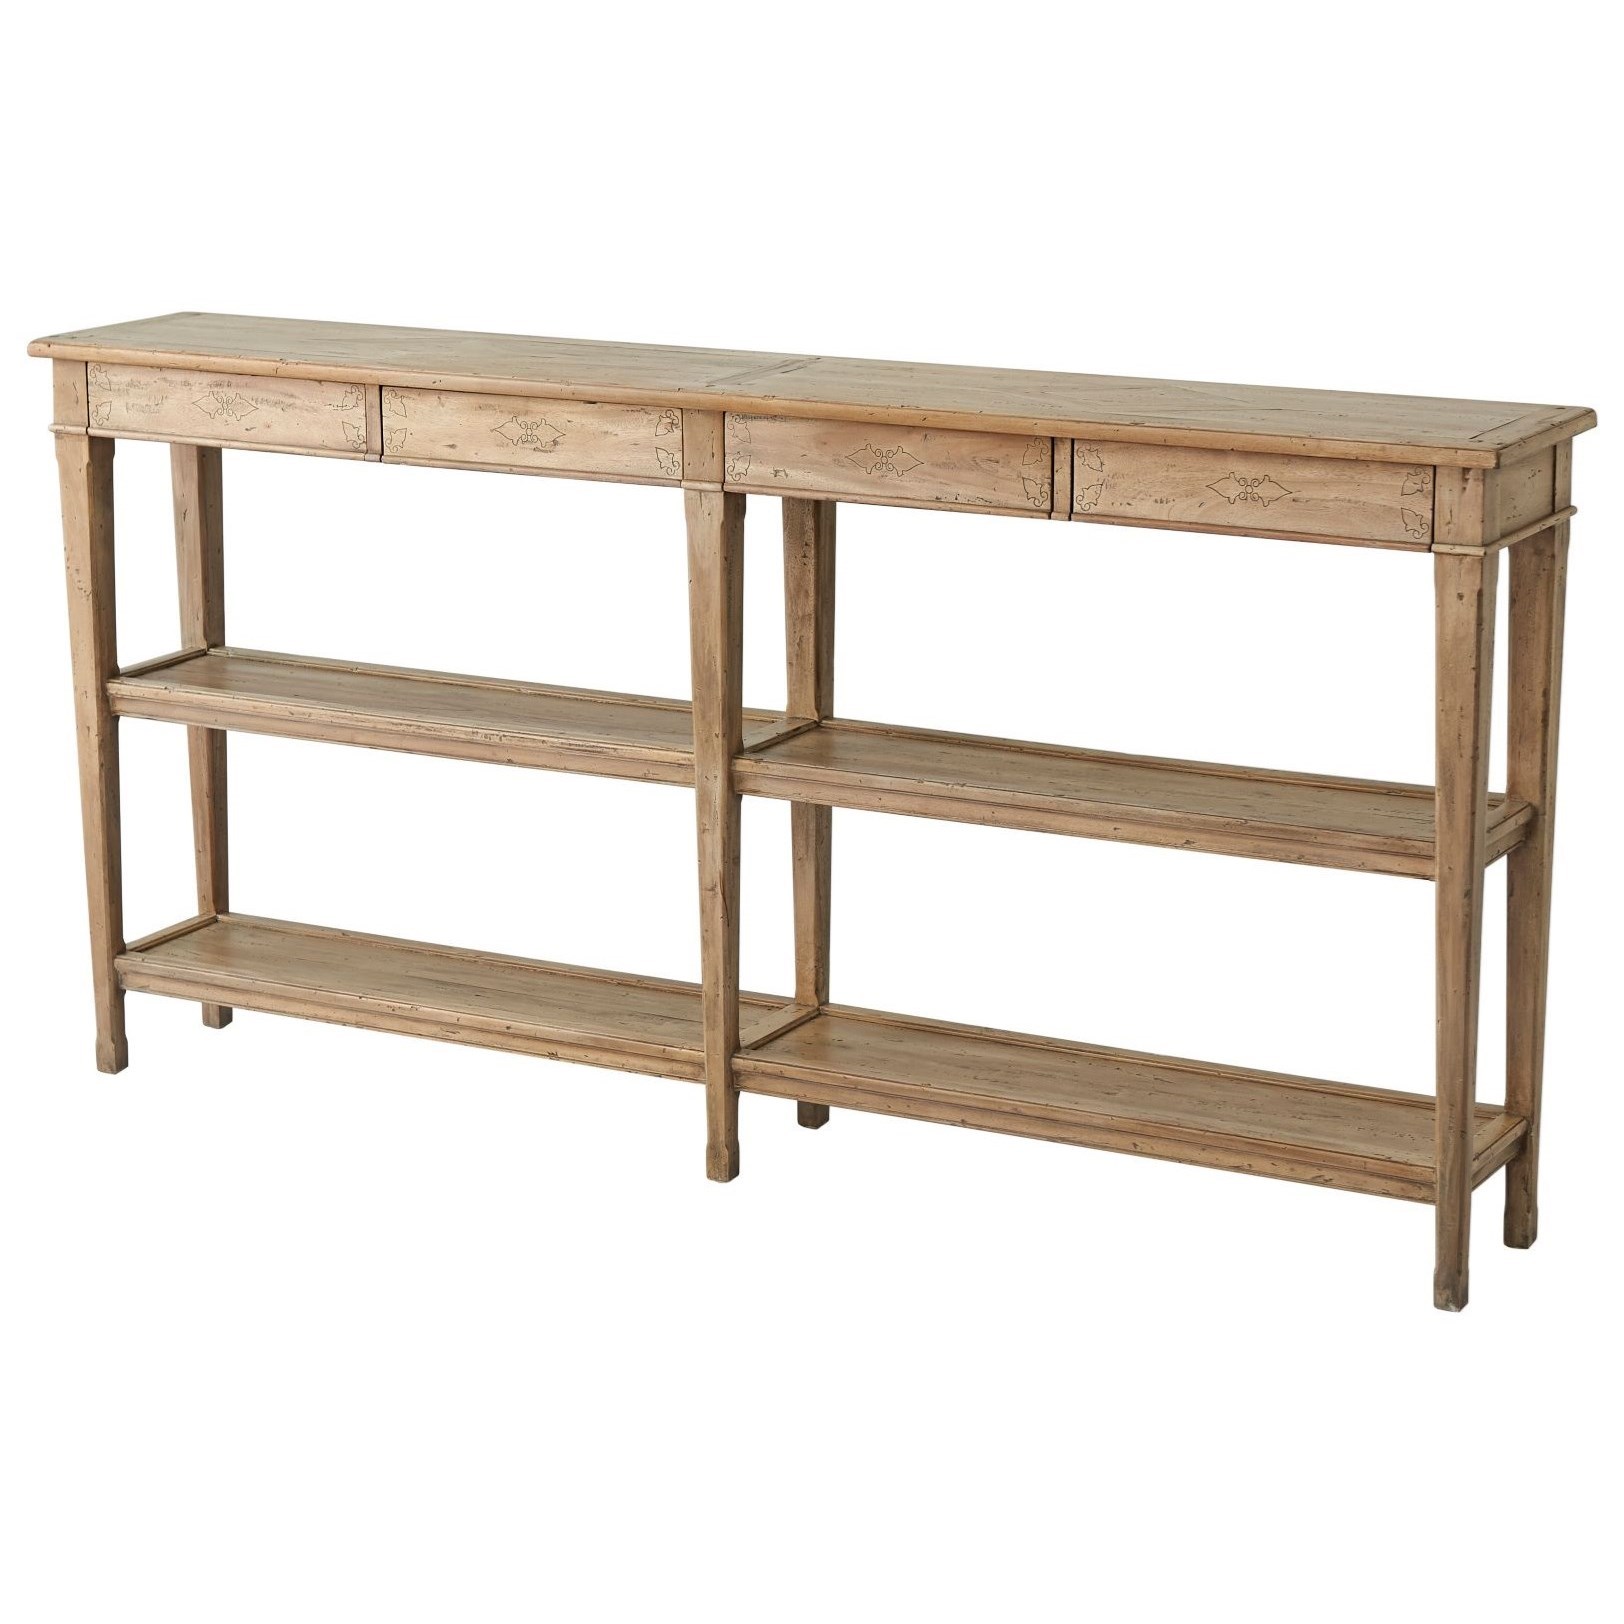 Narrow Village Console in Weathered Finish